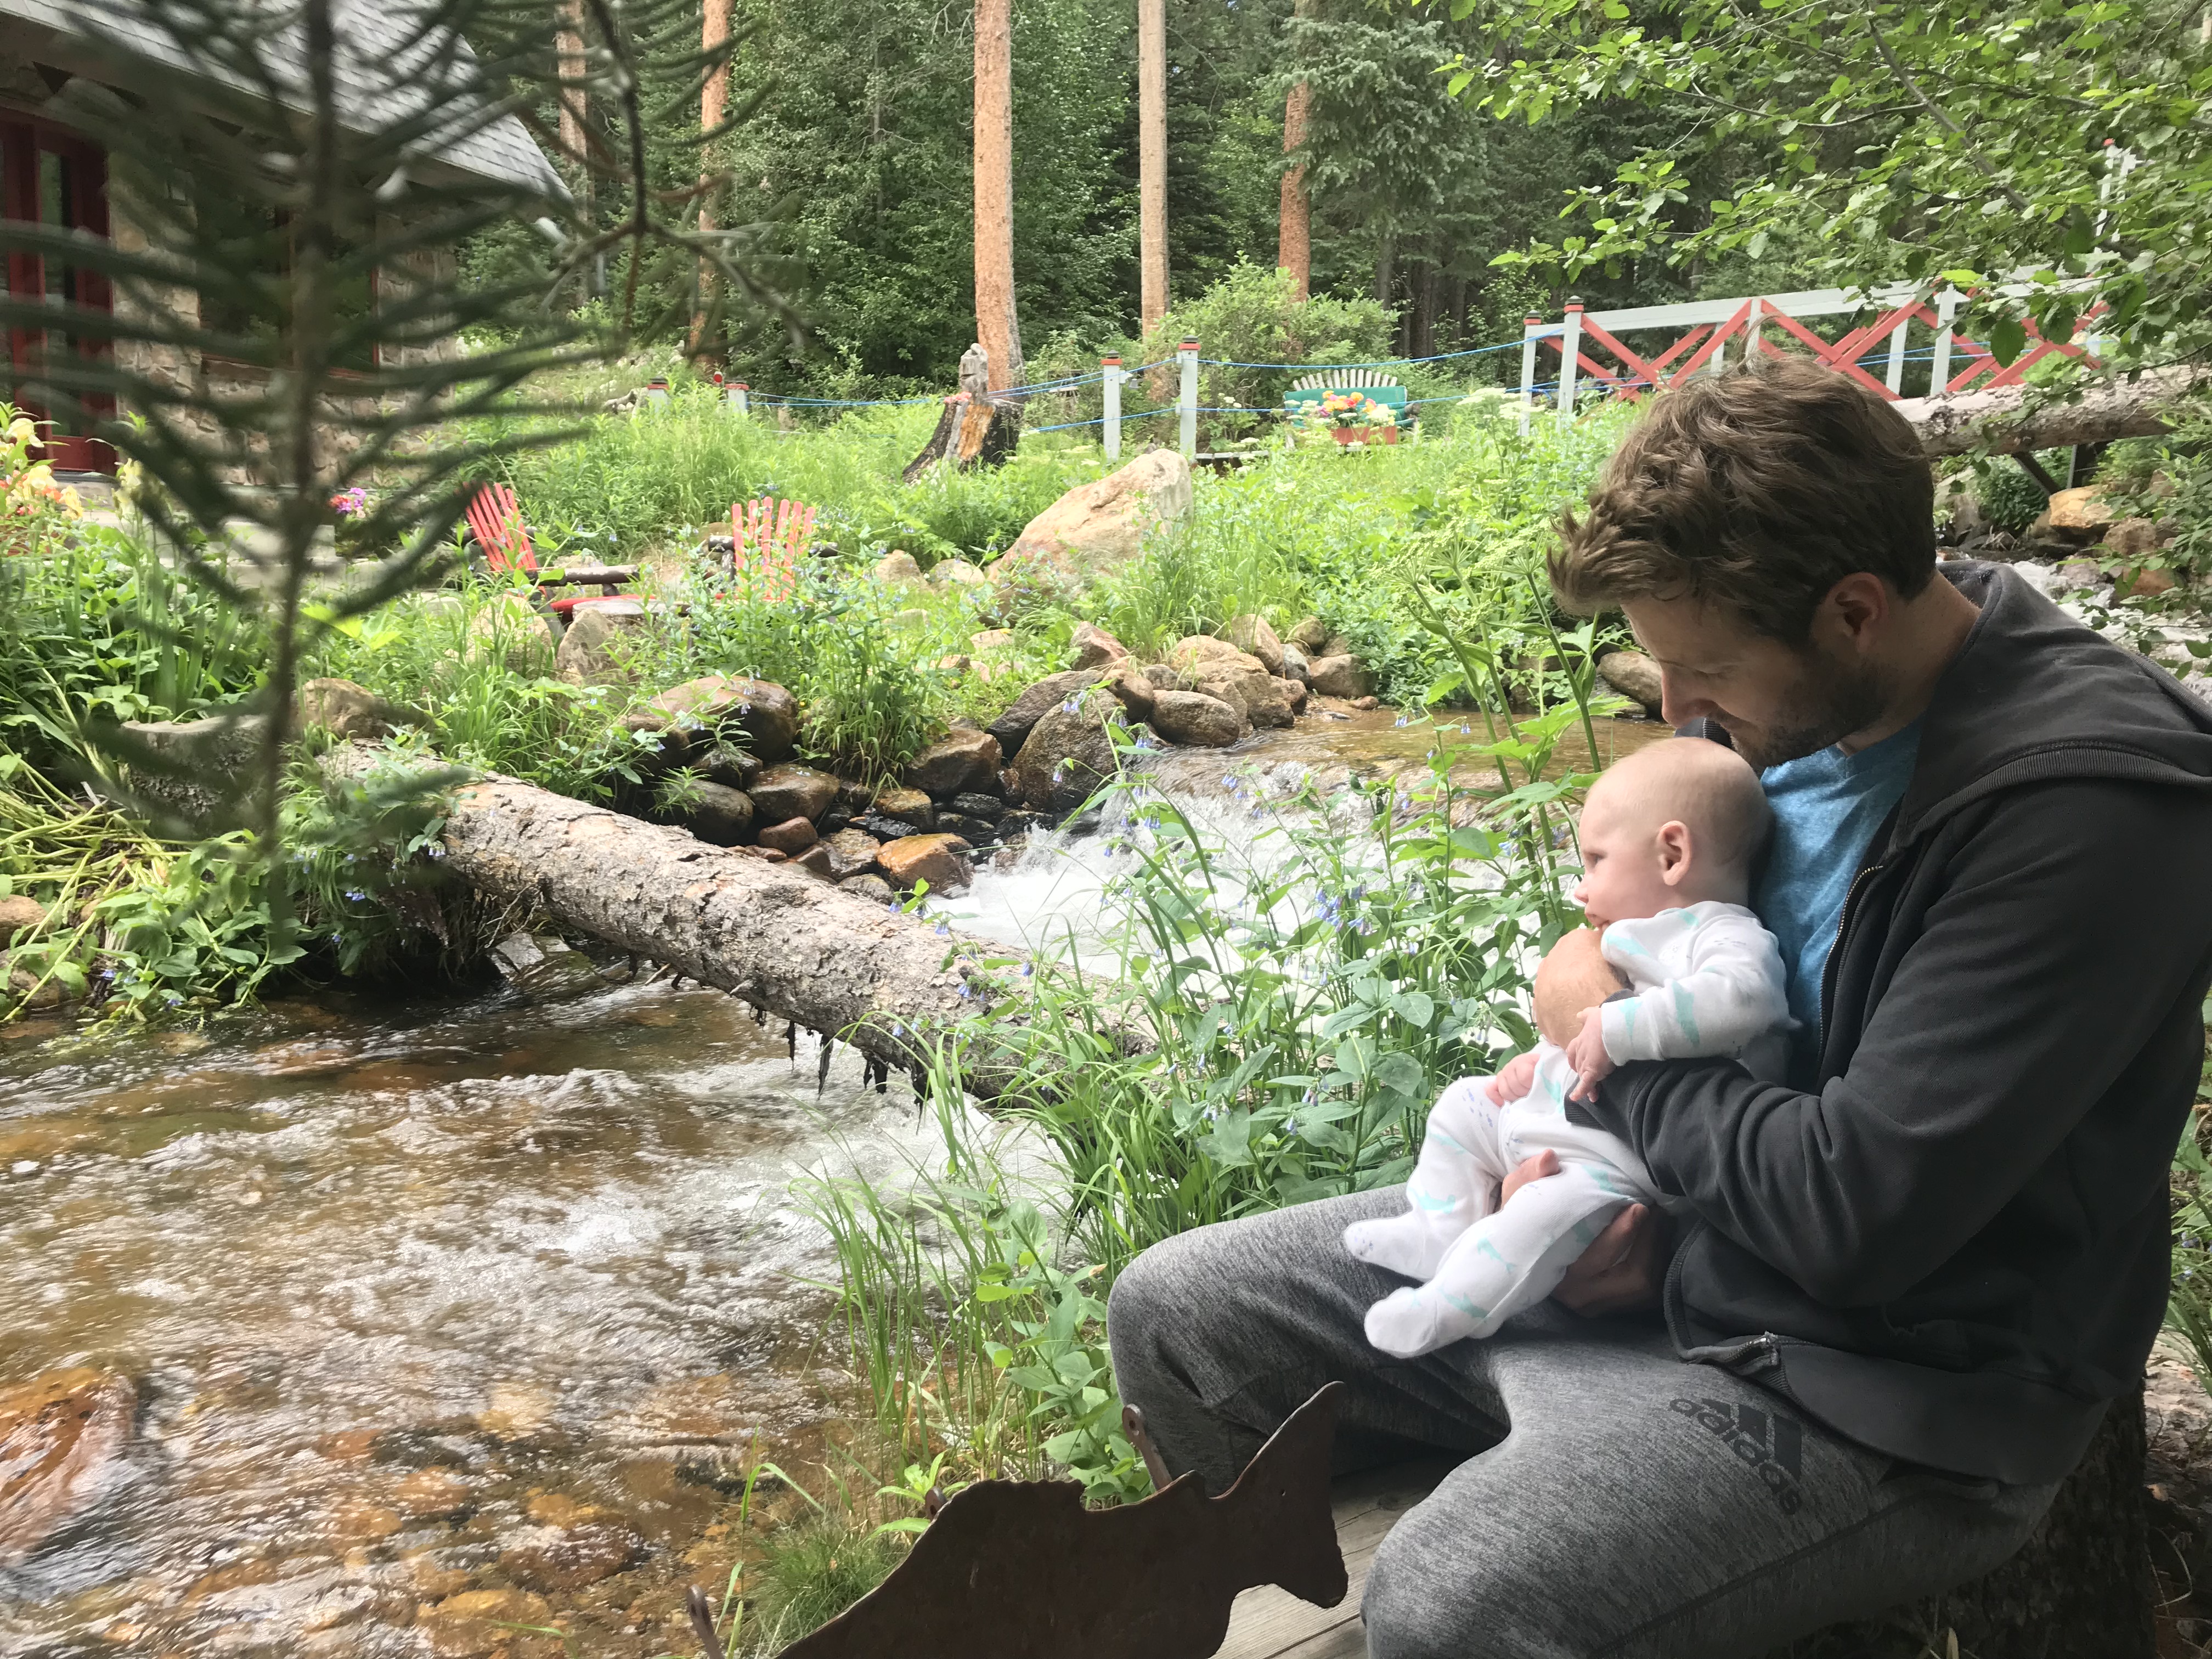 Owen and Jeff in Idaho Springs